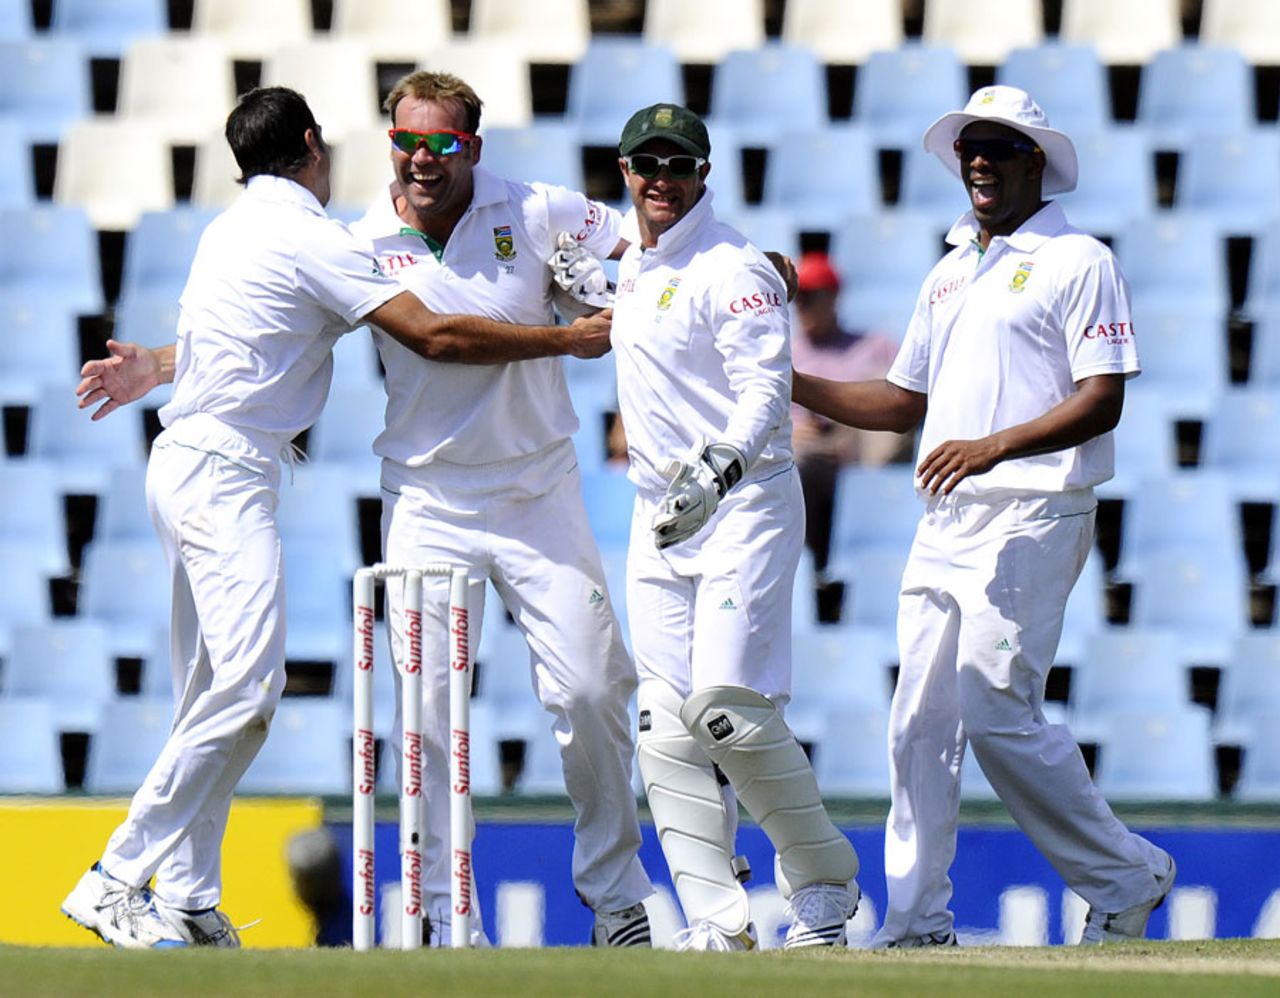 Jacques Kallis took a spectacular catch to get rid of Thisara Perera, South Africa v Sri Lanka, 1st Test, Centurion, 1st day, December 15, 2011